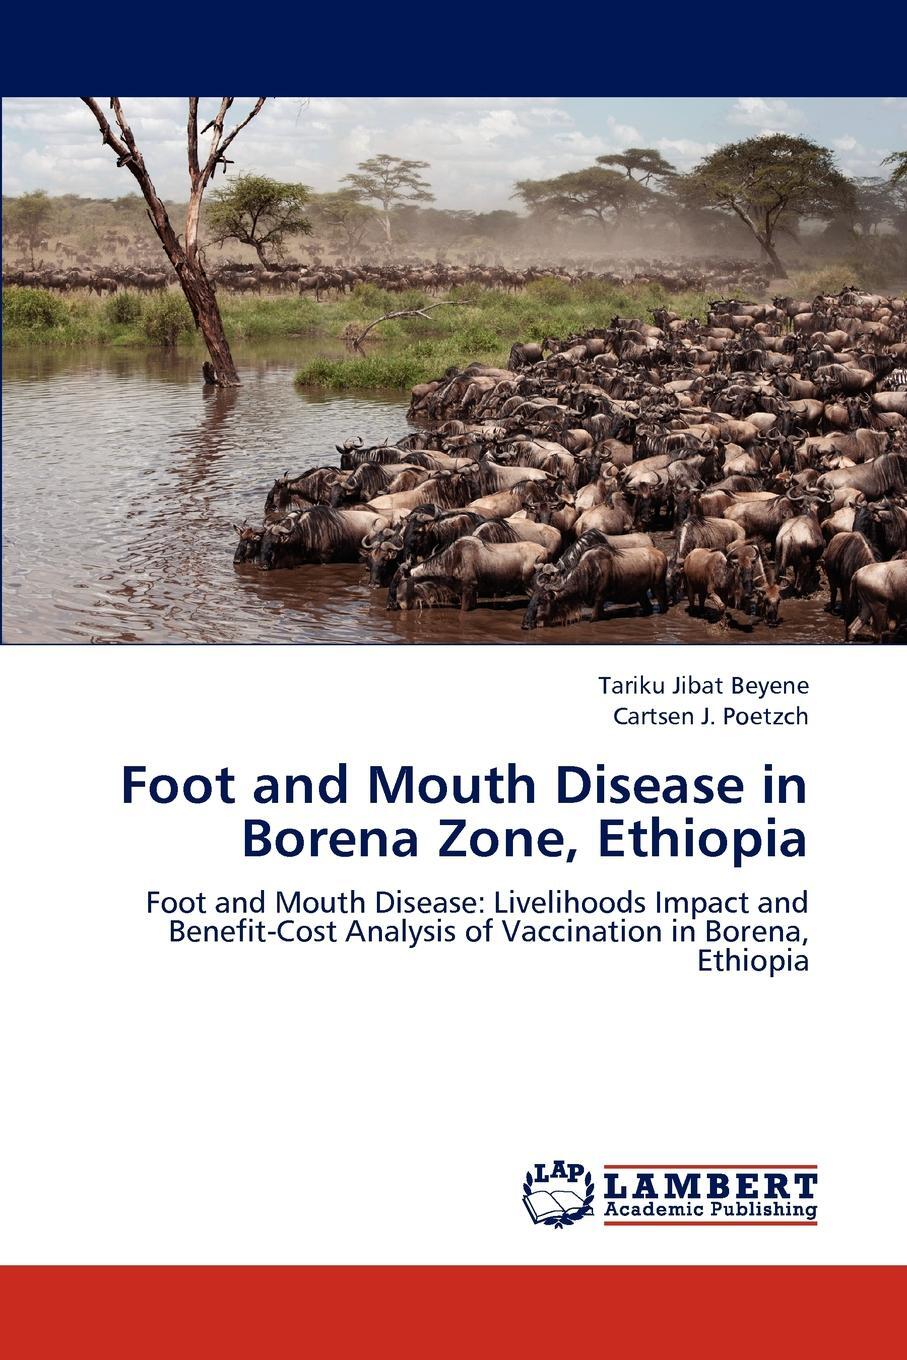 фото Foot and Mouth Disease in Borena Zone, Ethiopia